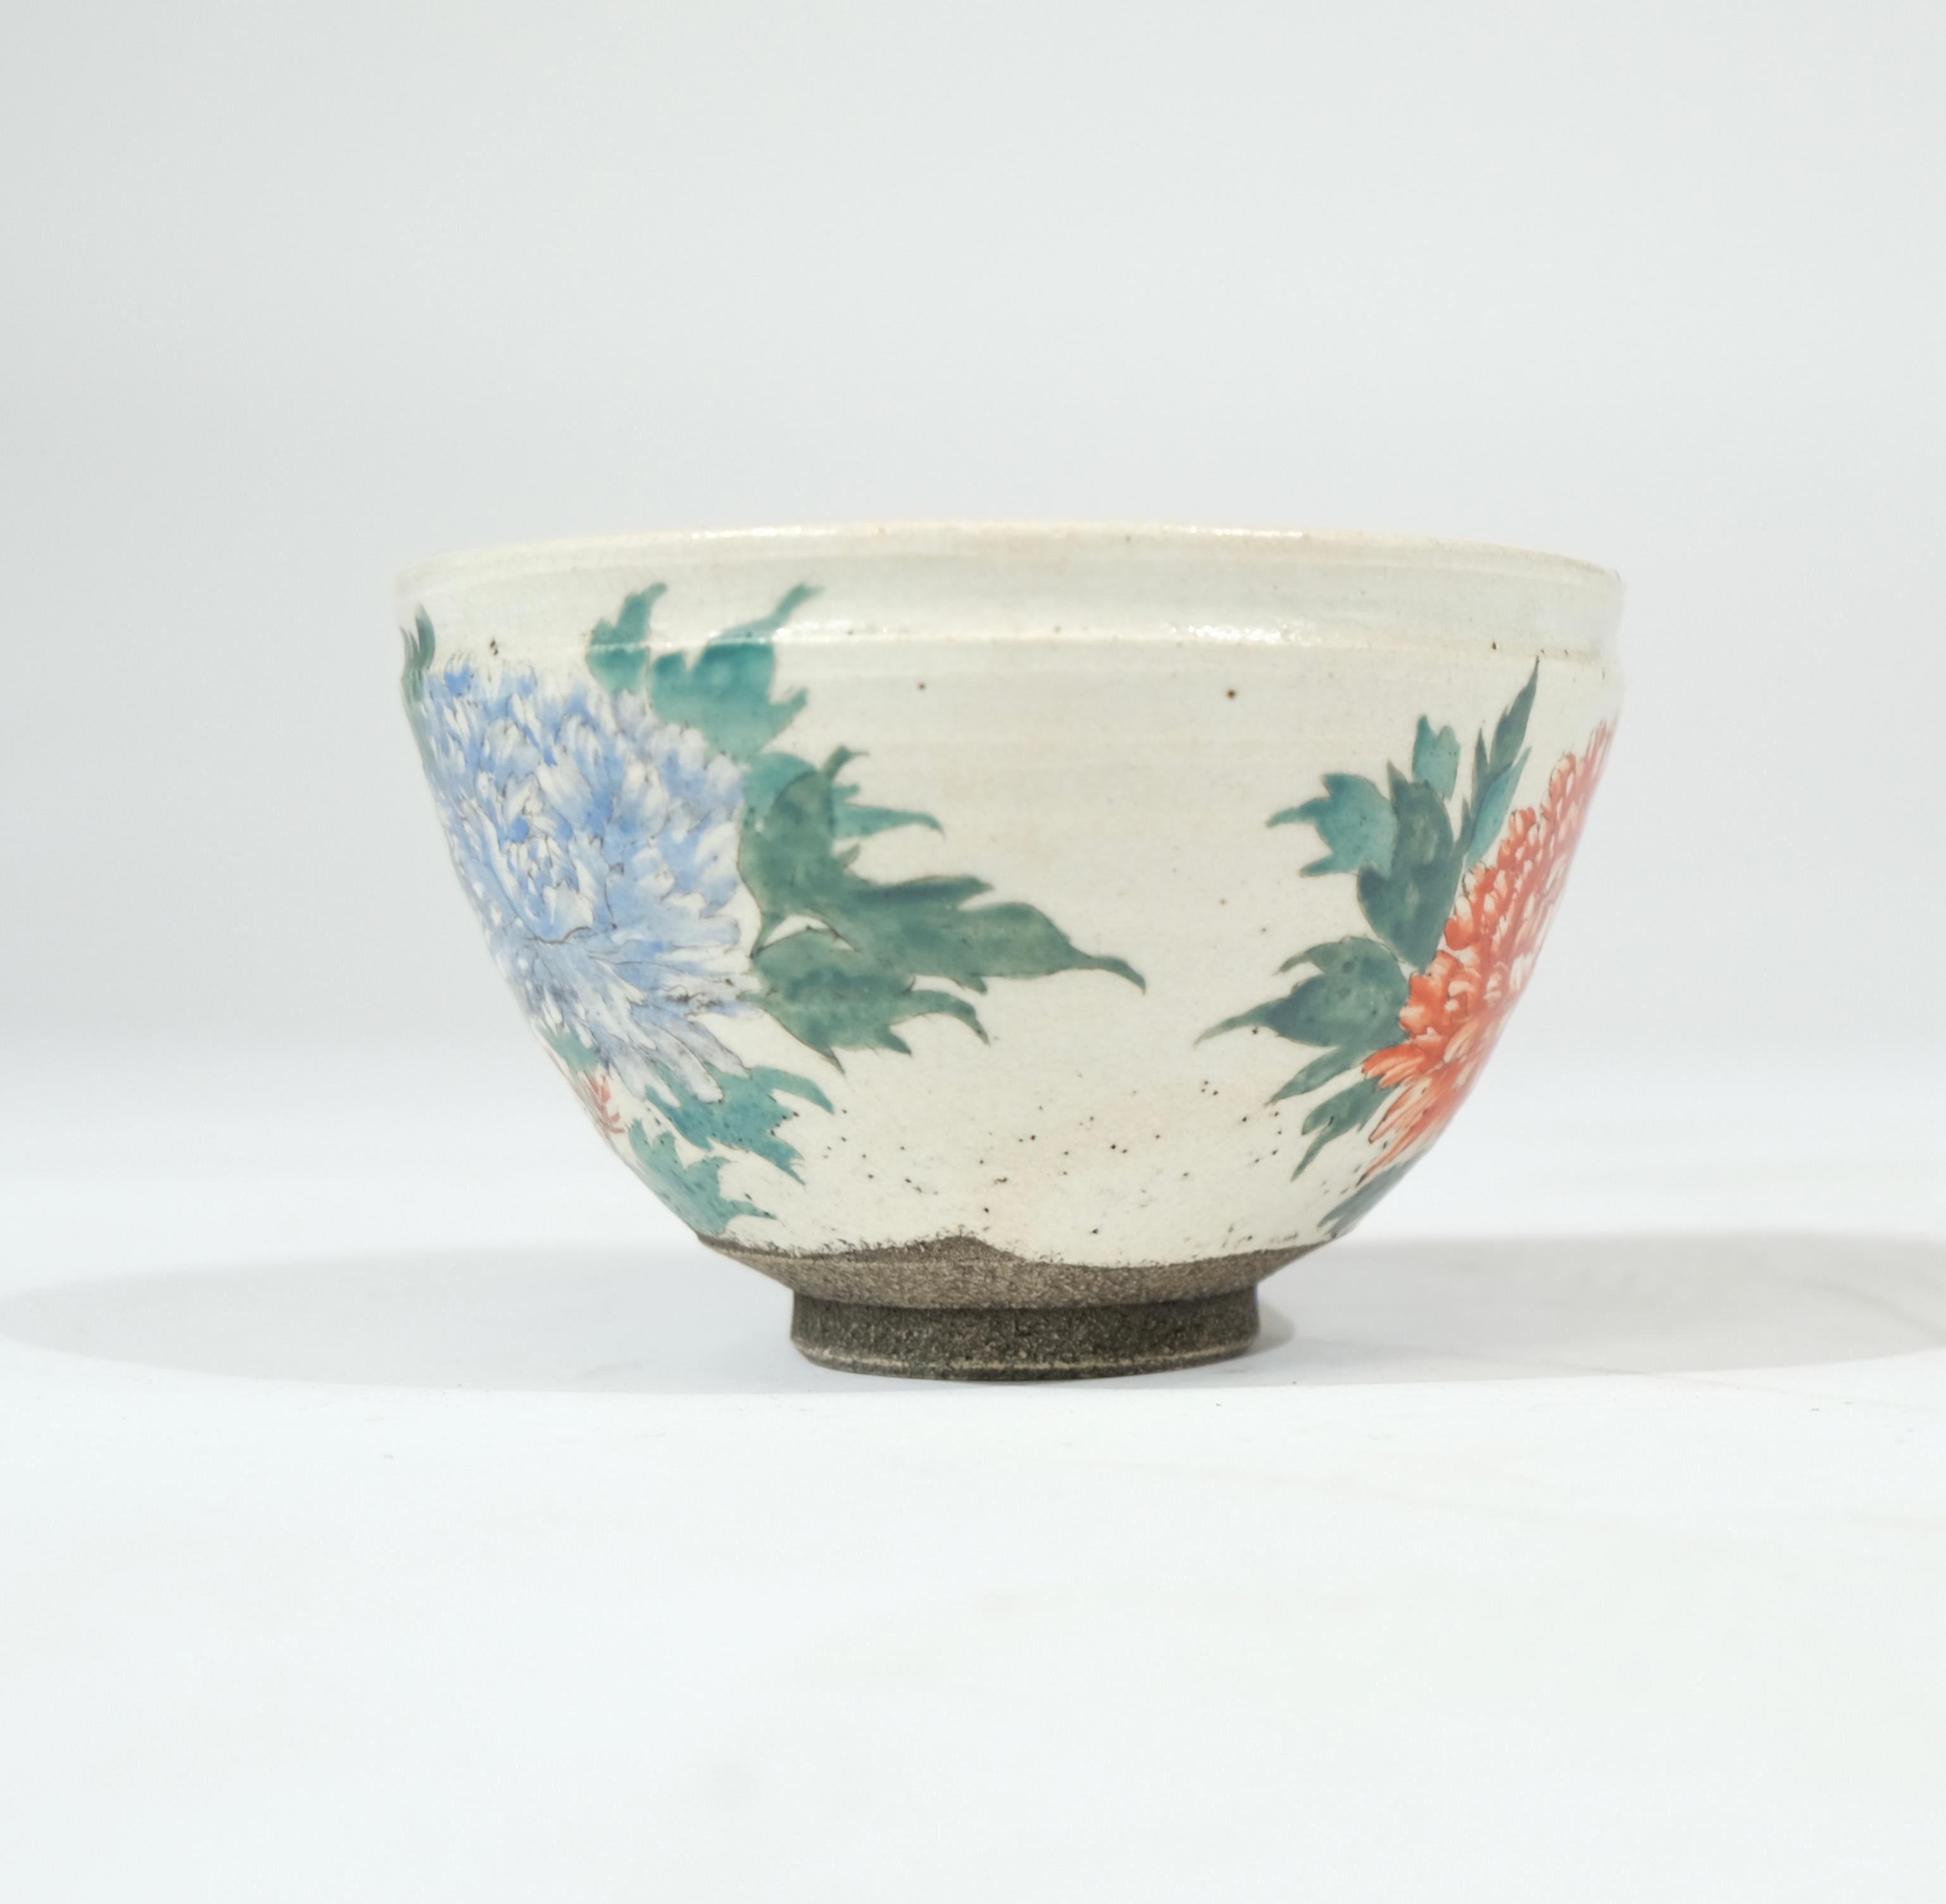 A late 19th-century Japanese glazed tea bowl with painted floral design.